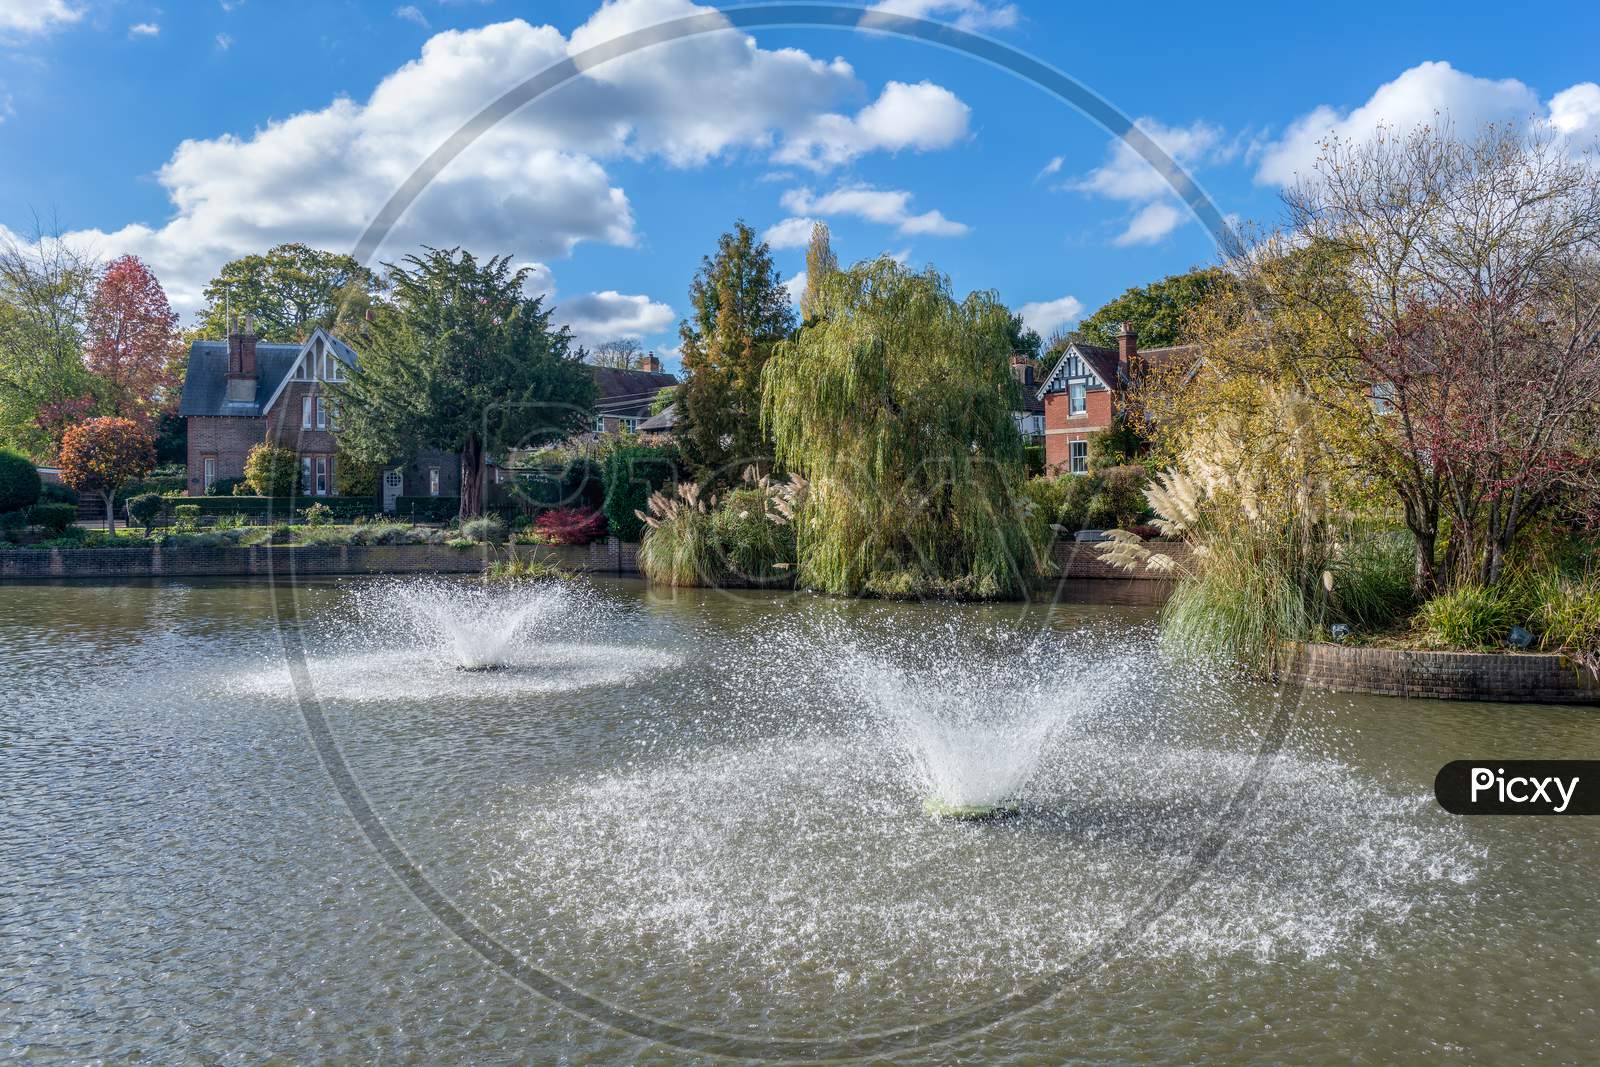 Lindfield, West Sussex/Uk -October 29 : View Of The Pond In Lindfield West Sussex On October 29, 2018